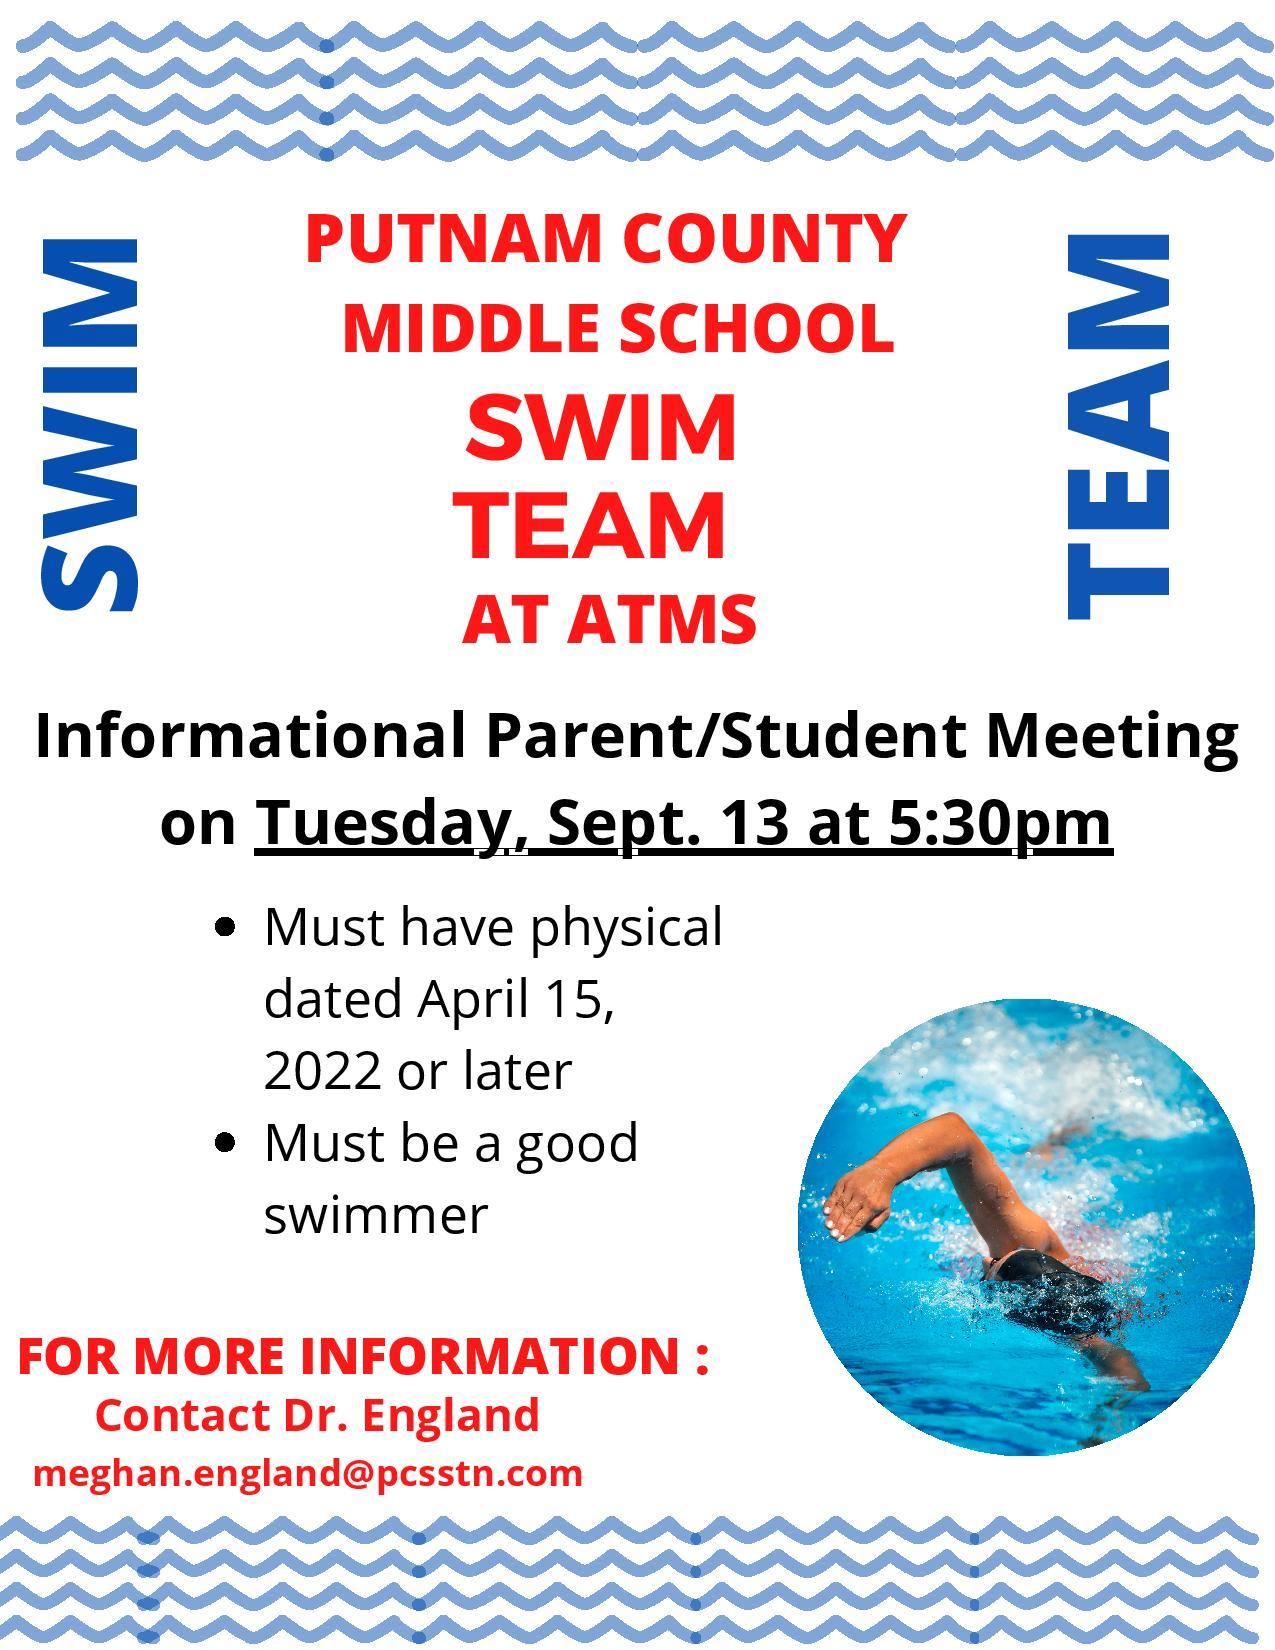 
SWIM TEAM. PUTNAM COUNTY MIDDLE SCHOOL SWIM TEAM AT ATMS. Informational Parent/Student Meeting on Tuesday, Sept. 13 at 5:30 p.m.
Must have physical dated April 15, 2022 or later. Must be a good swimmer. FOR MORE INFORMATION: Contact Dr. England meghan.england@pcsstn.com